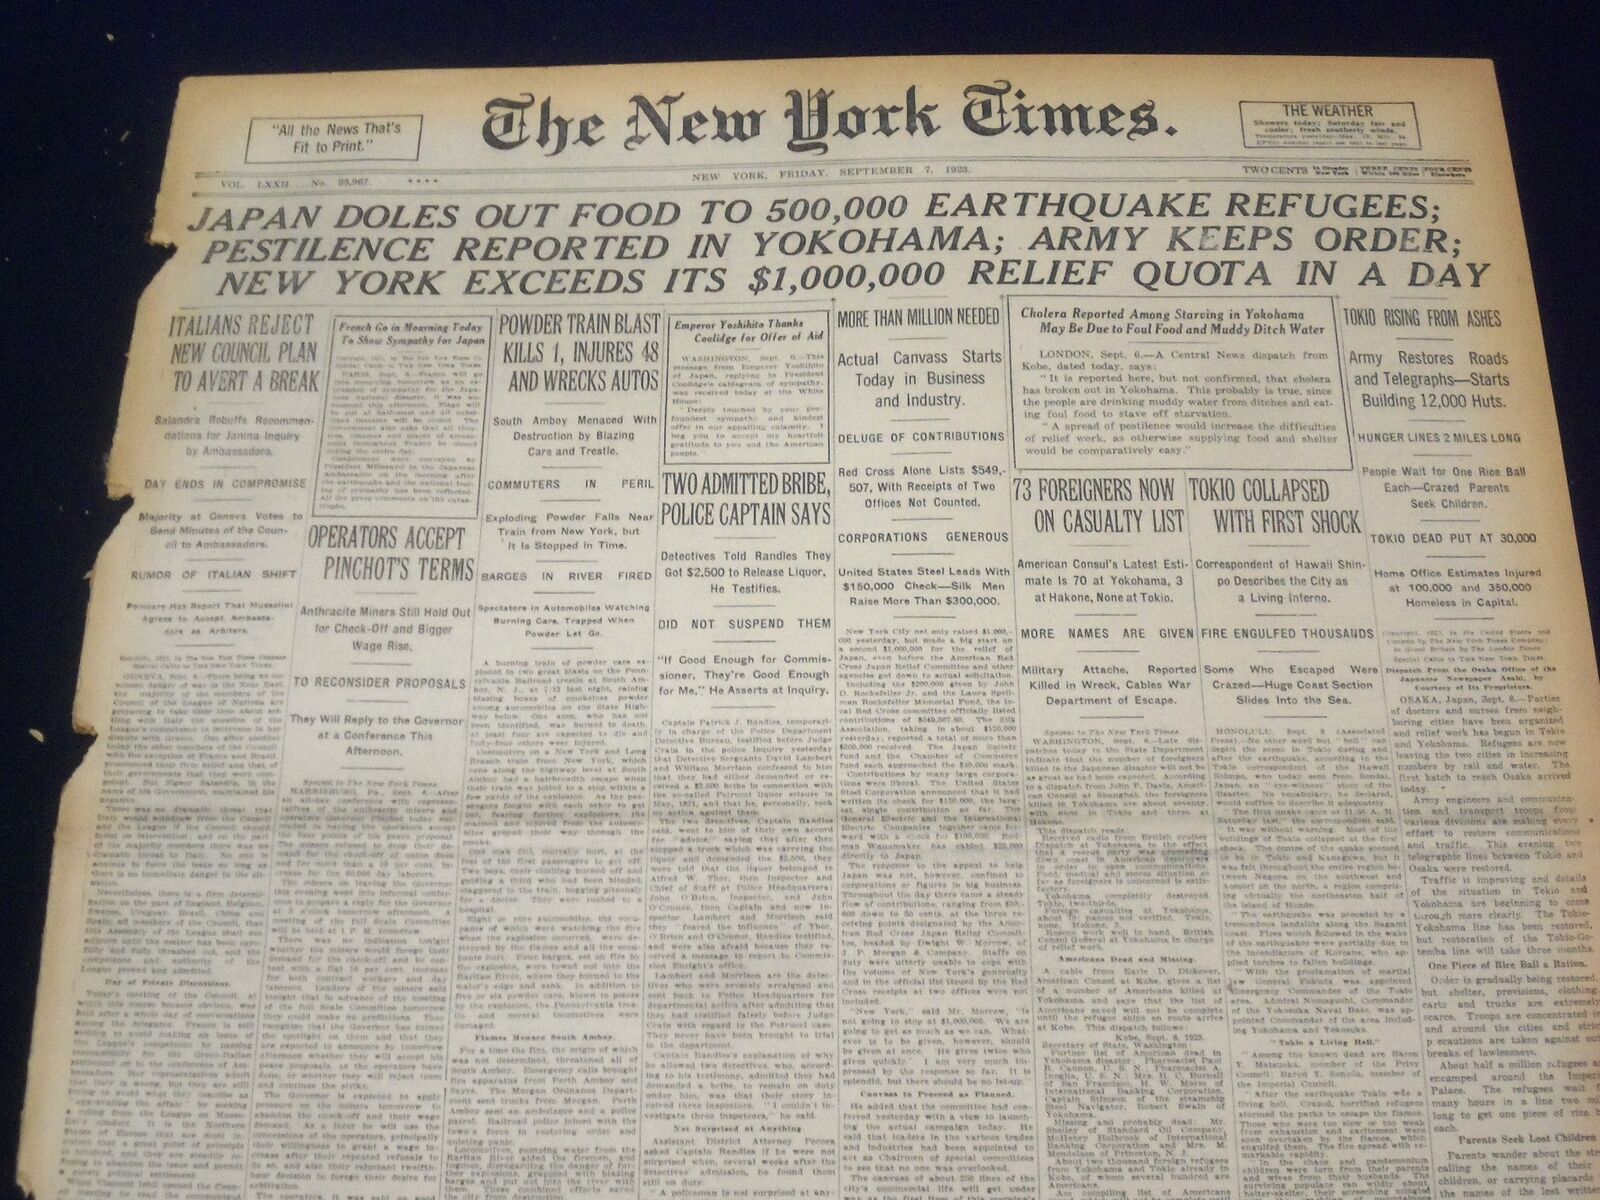 1923 SEP 7 NEW YORK TIMES - JAPAN DOLES OUT FOOD TO 500,000 - NT 9351